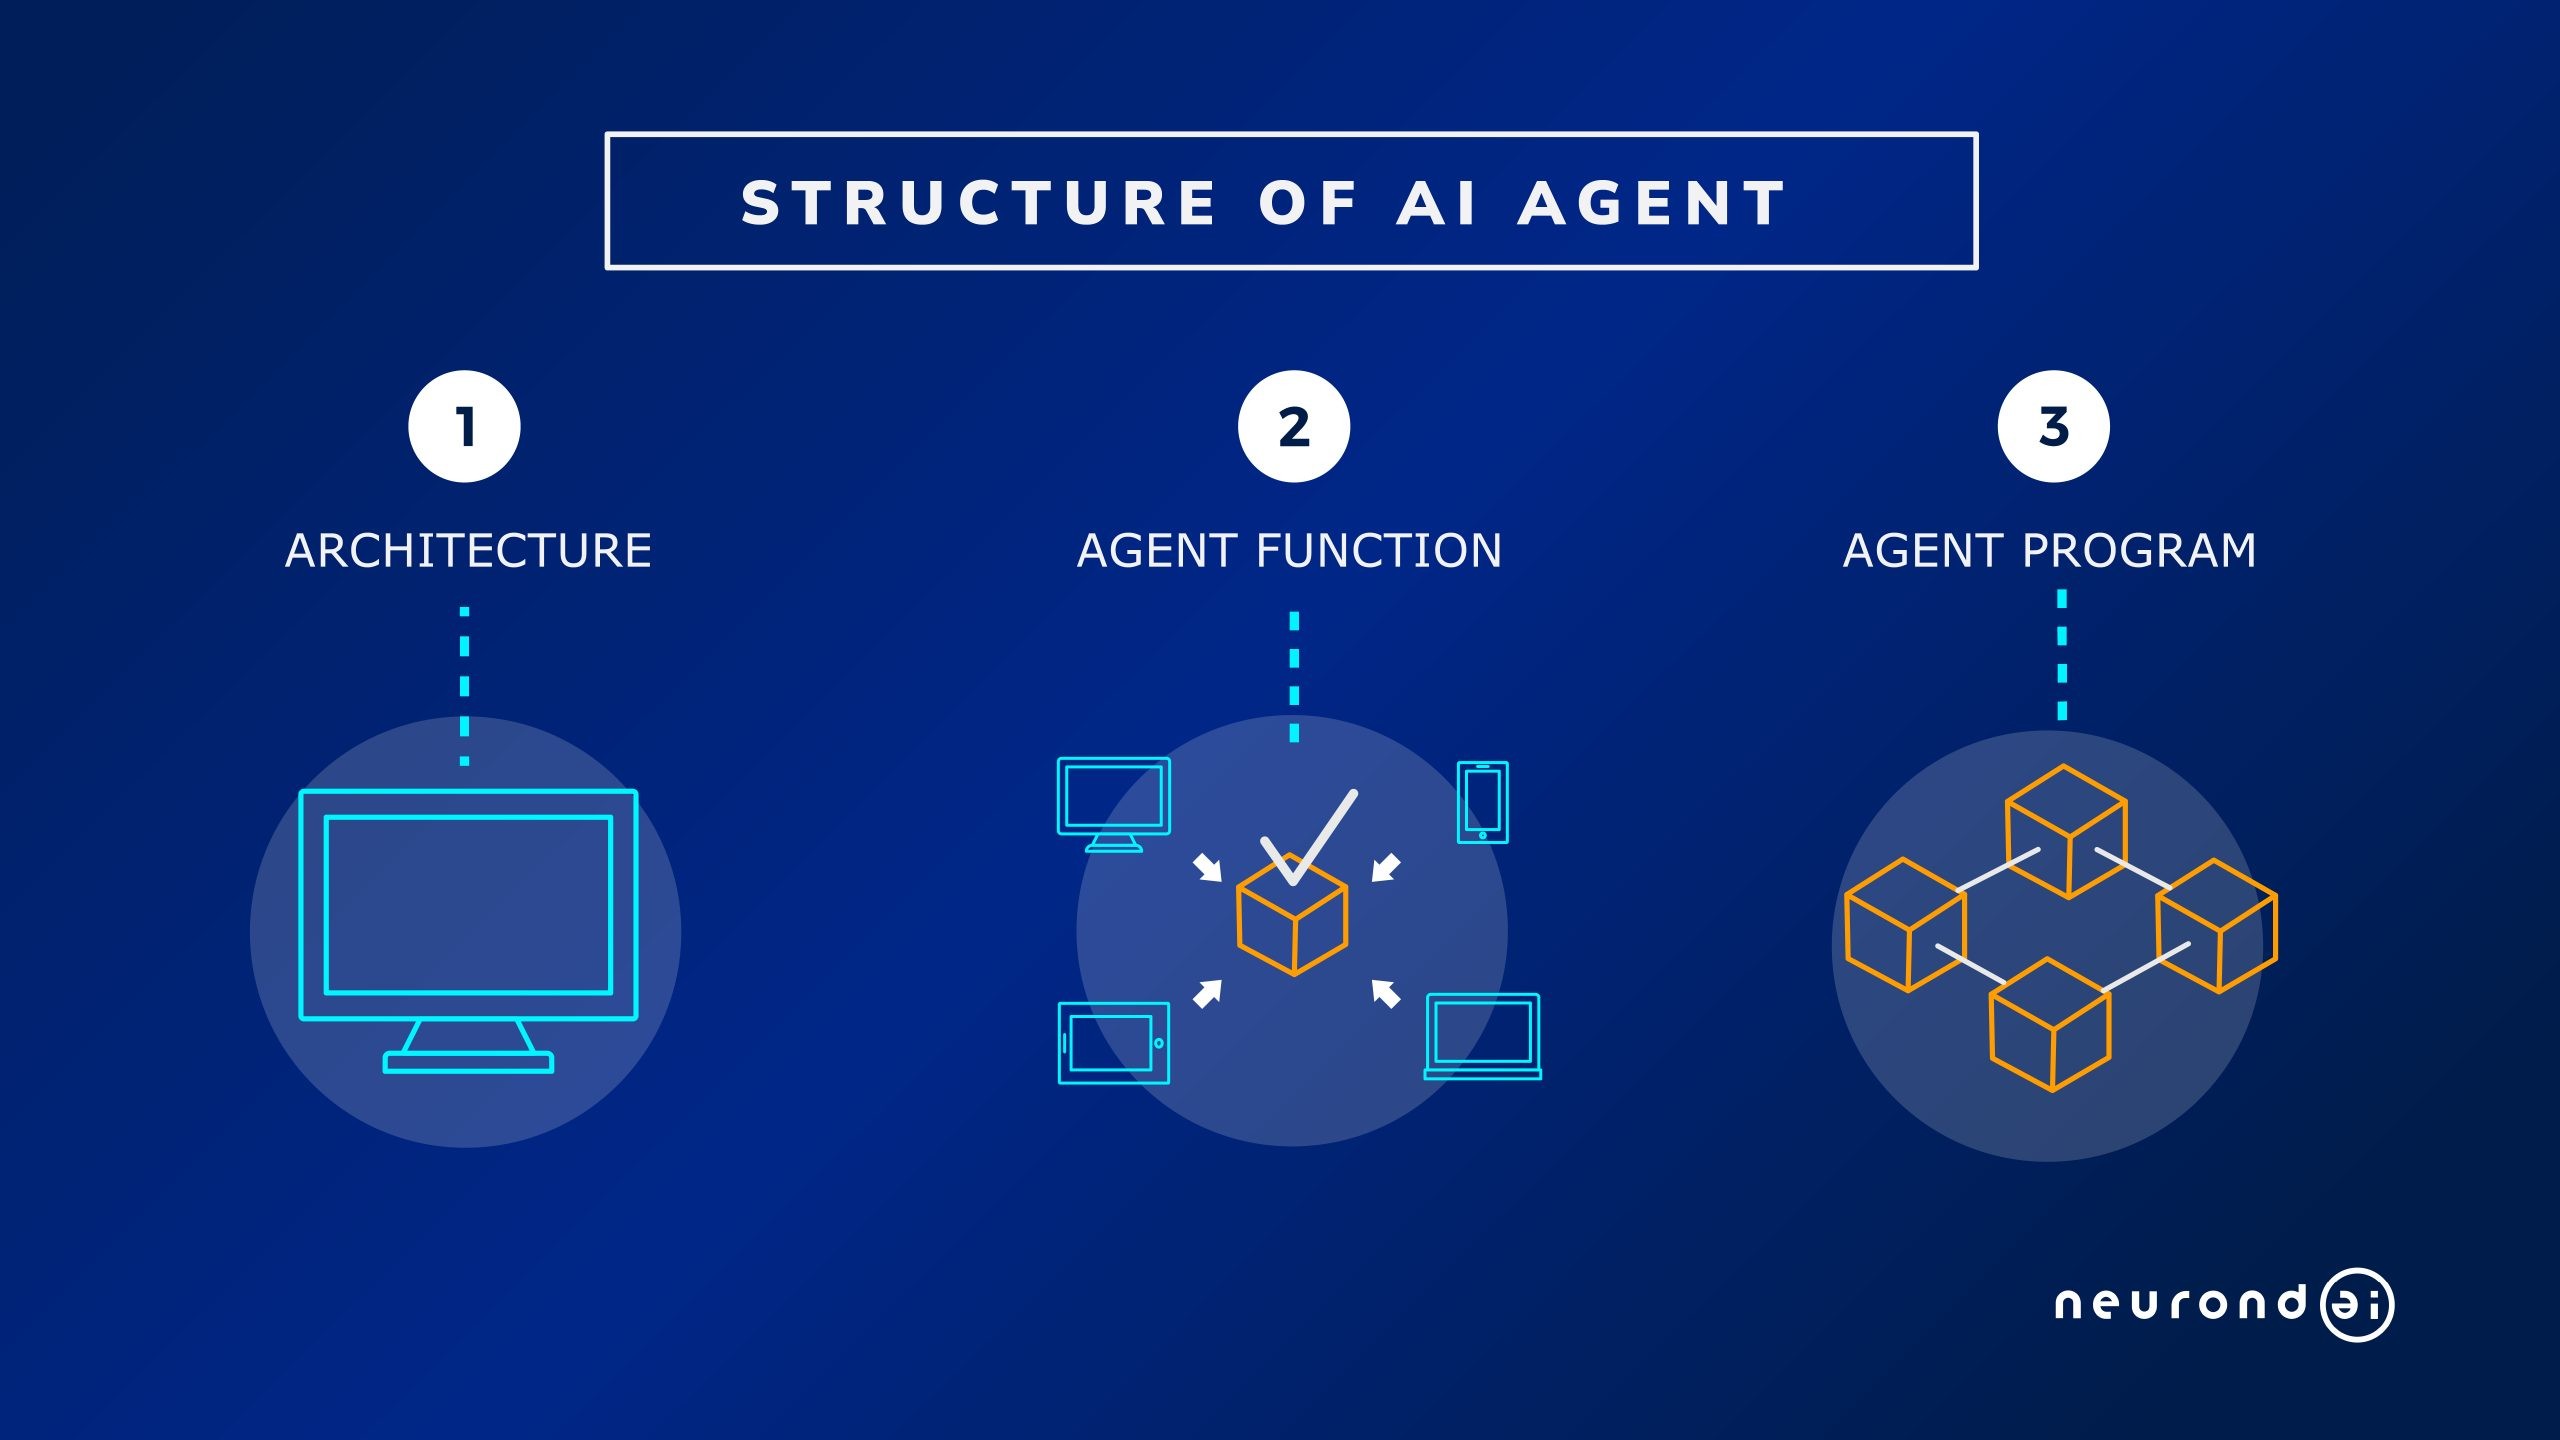 Structure of an AI Agent